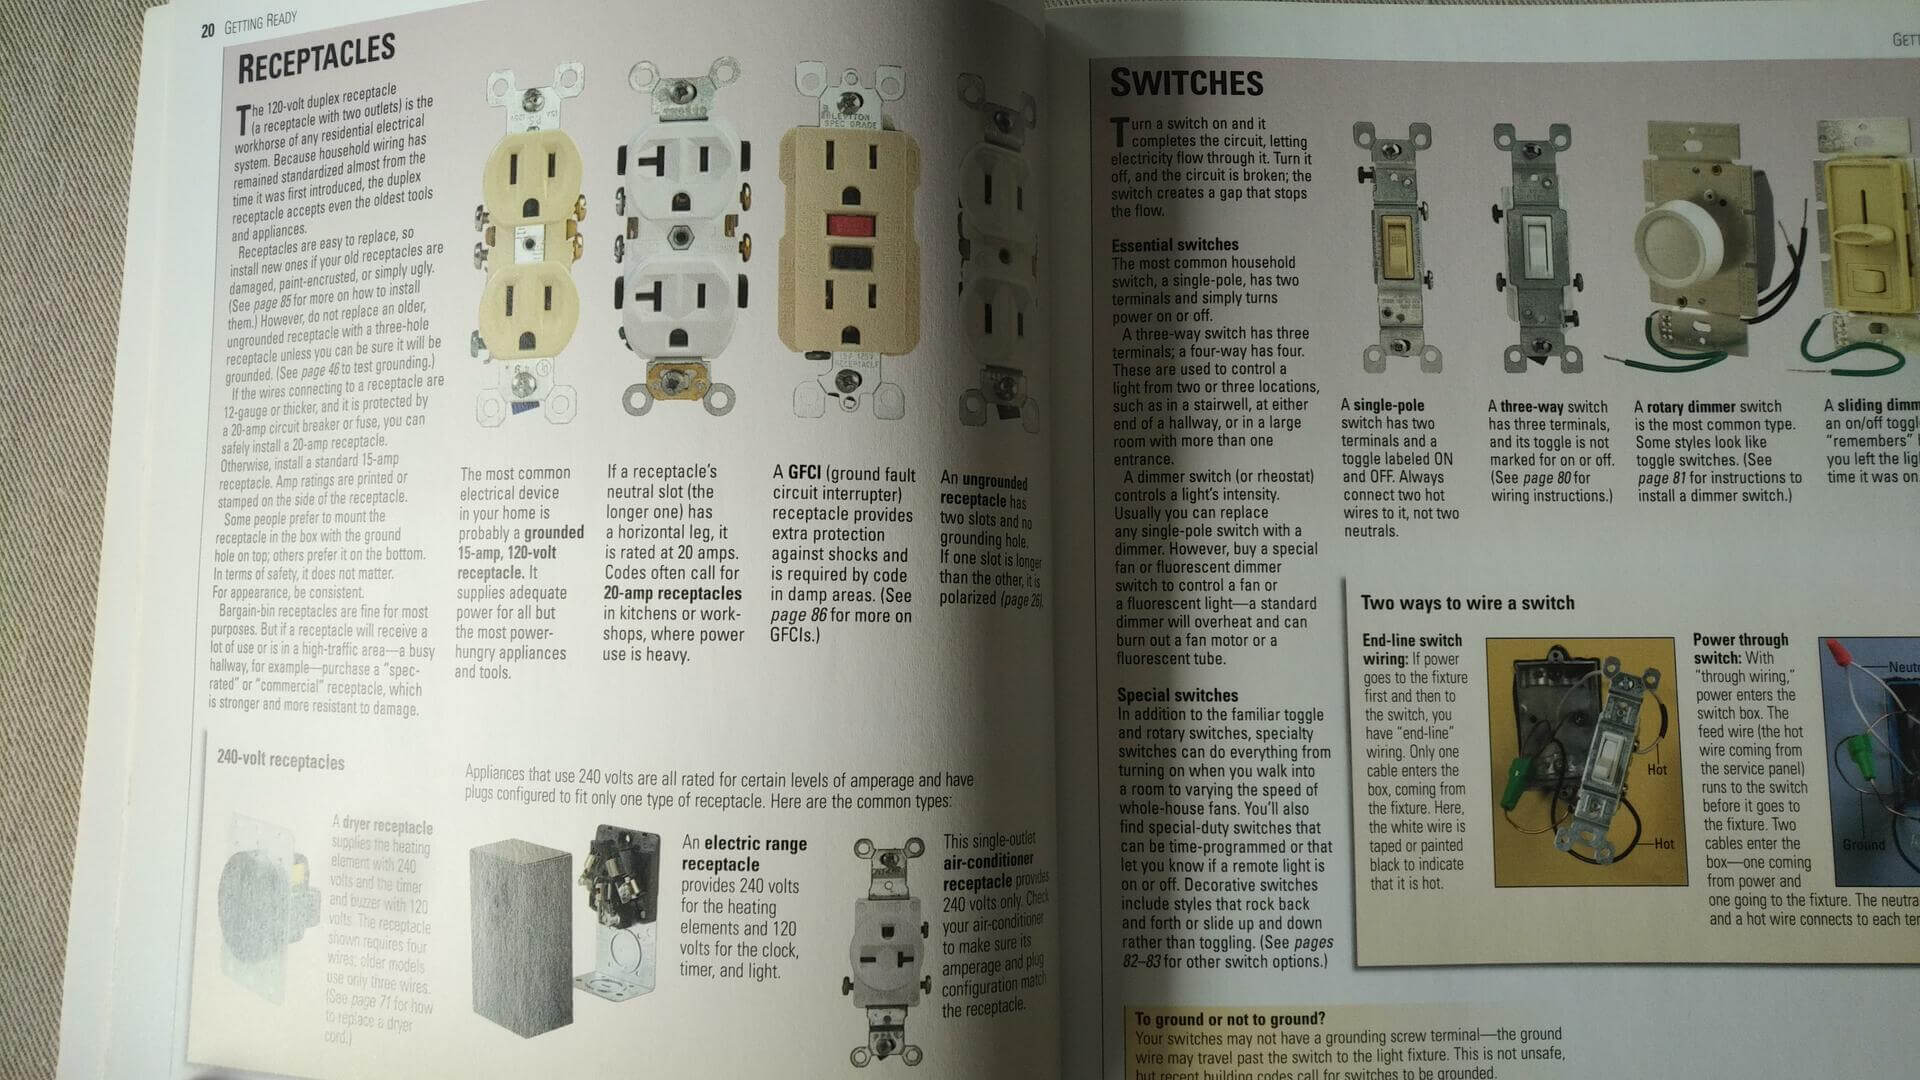 Stanley Complete Wiring electrical projects reference. Published by Stanley Works Inc ISBN-10 0696217309. Most complete & easiest to use DIY wiring book.